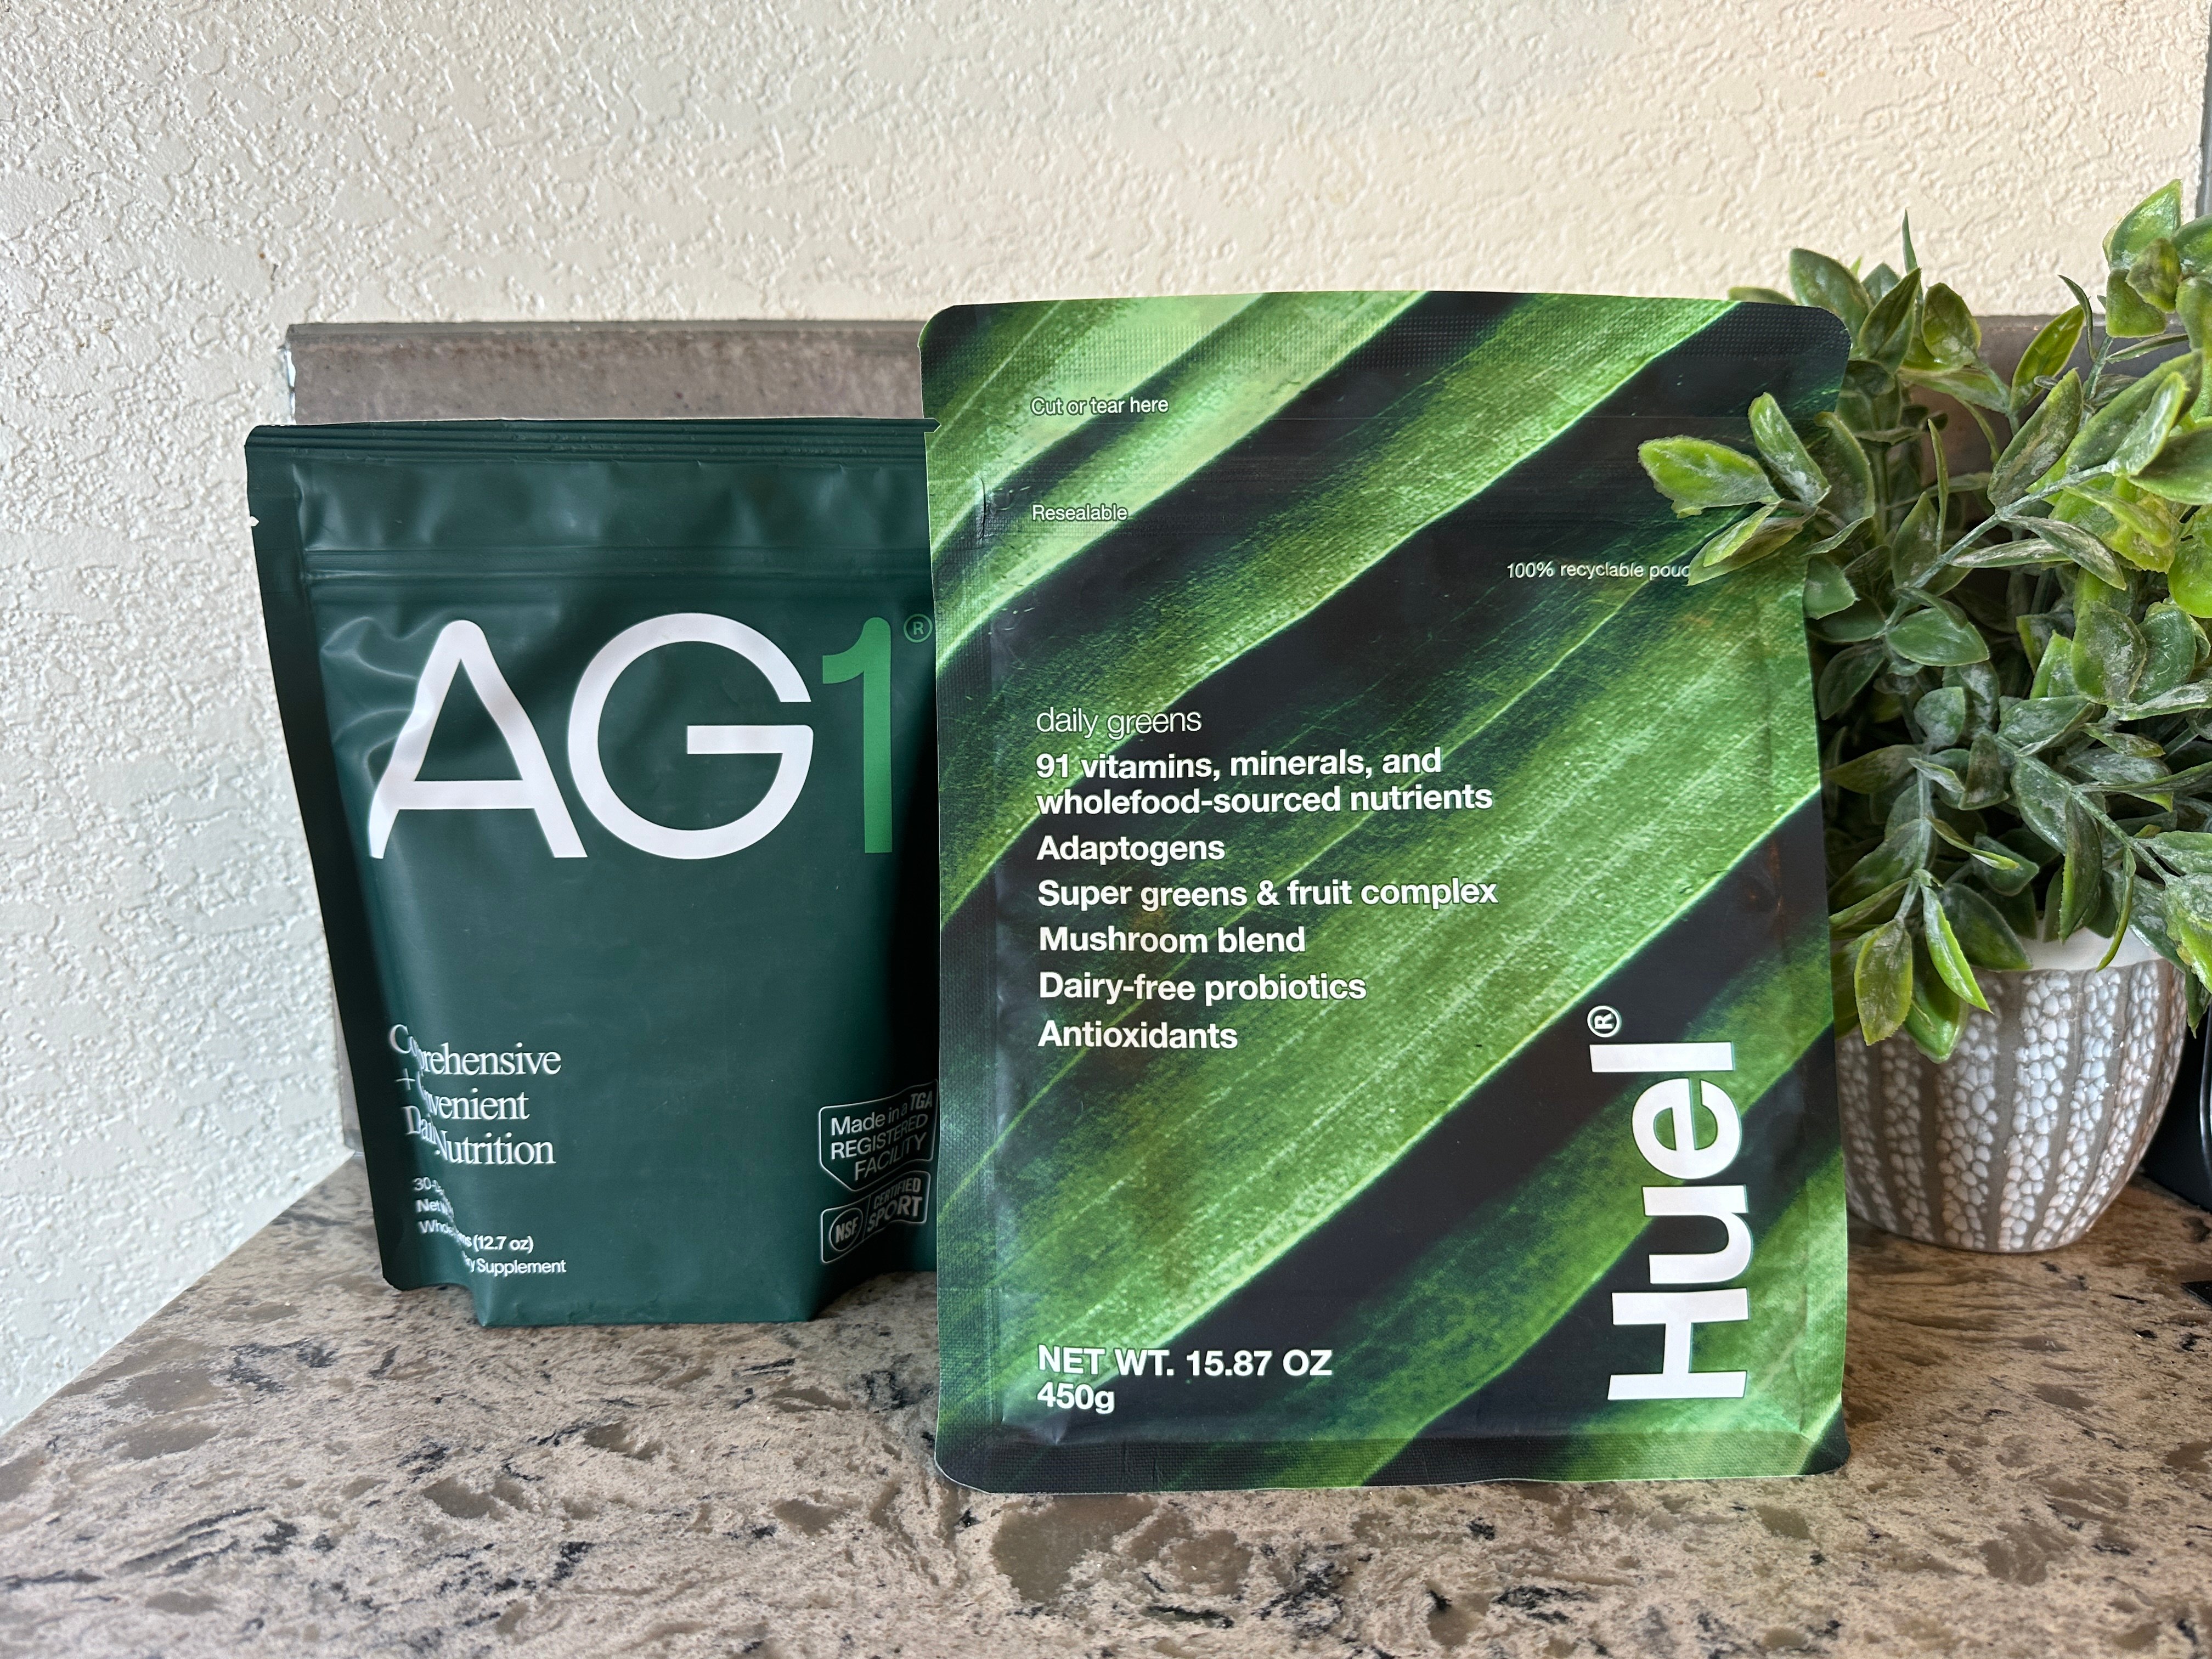 Huel Daily Greens vs. AG1: Which Greens Powder Is My Pick?